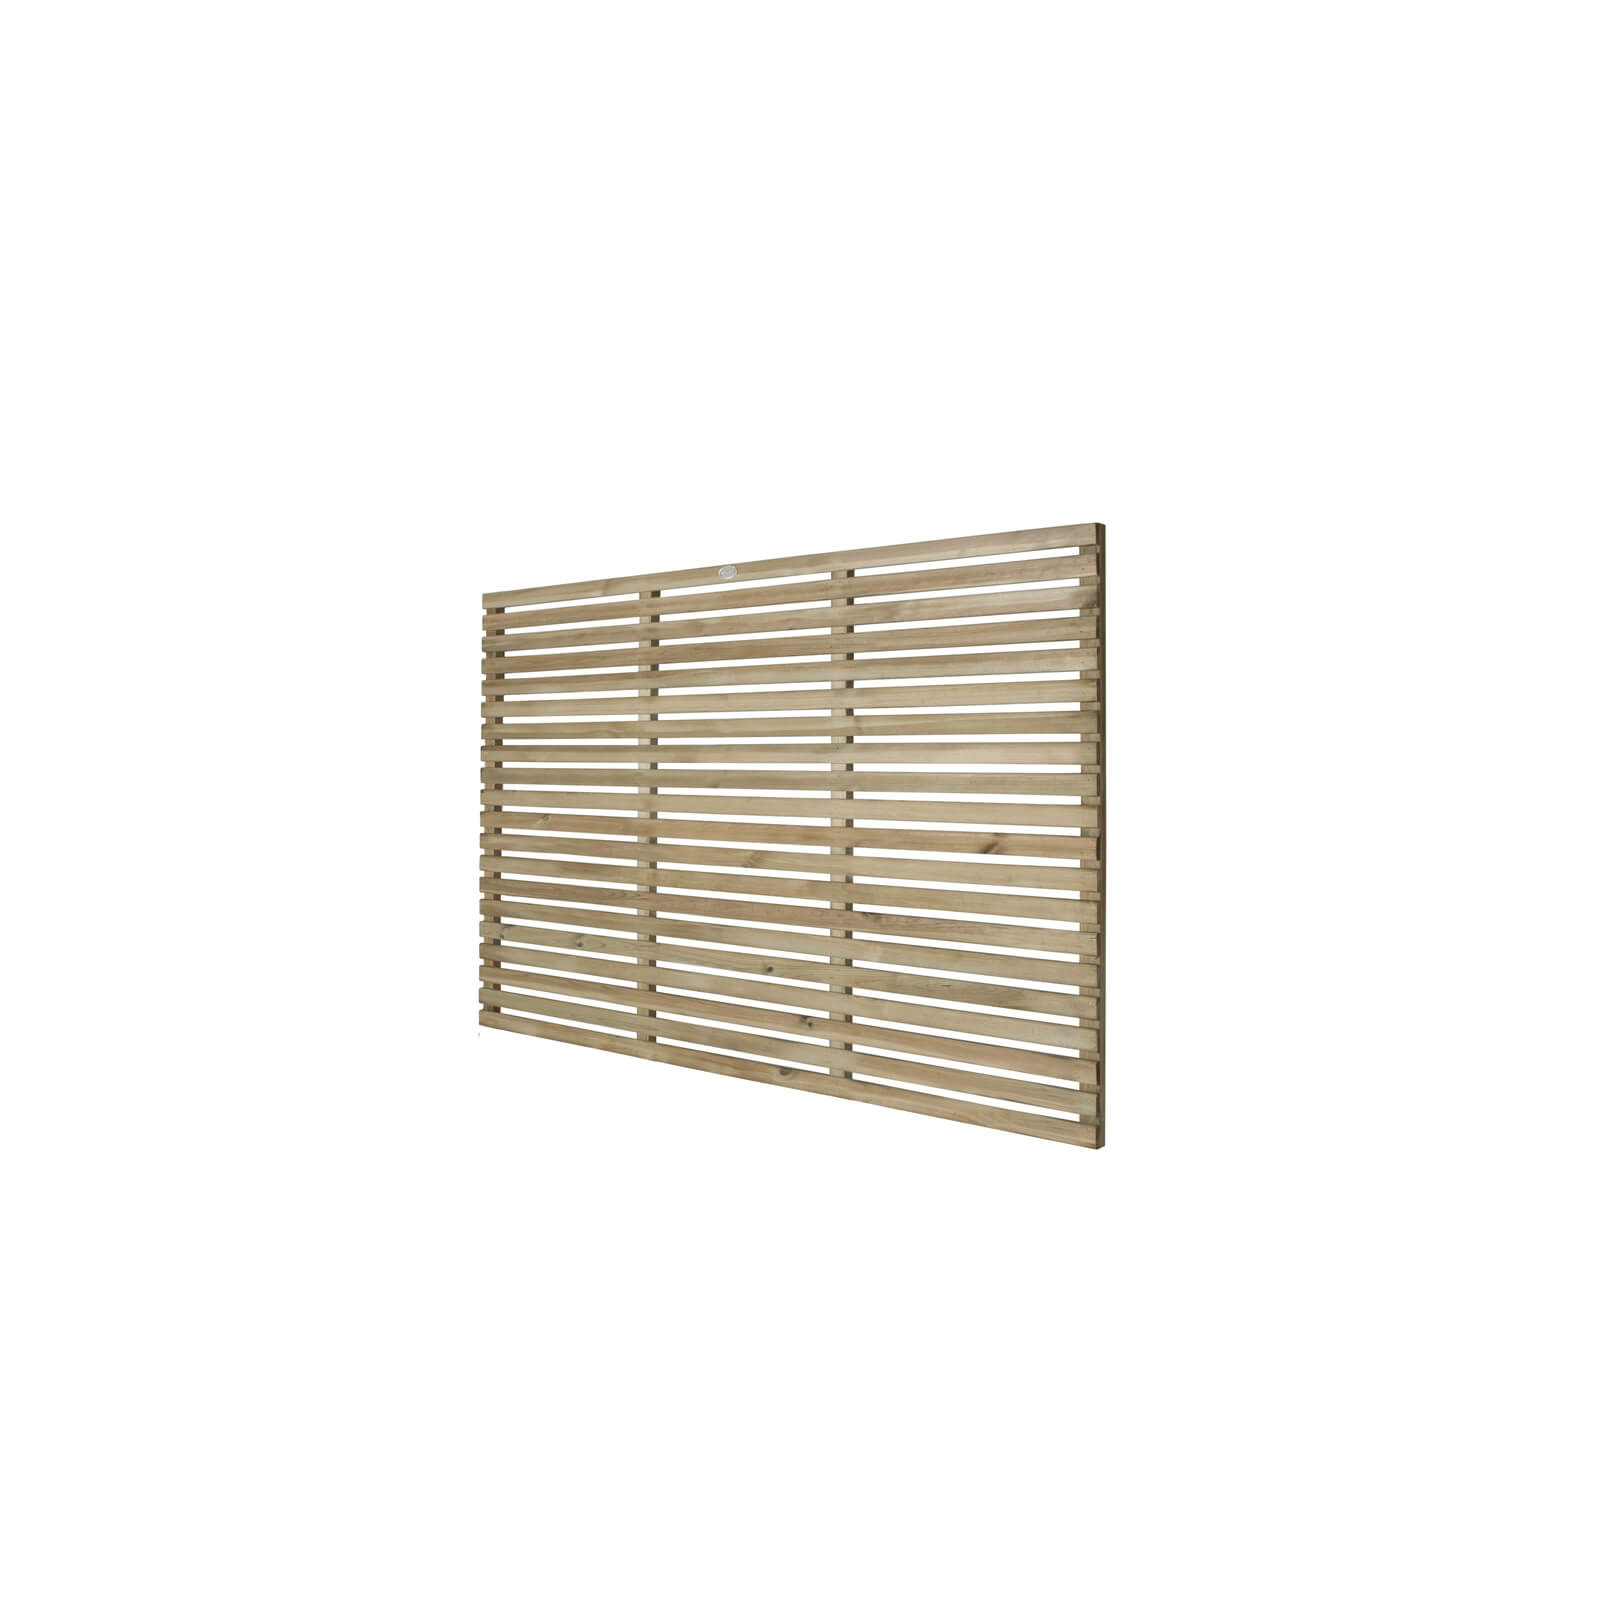 4ft Pressure Treated Contemporary Slatted Fence Panel - Pack of 3